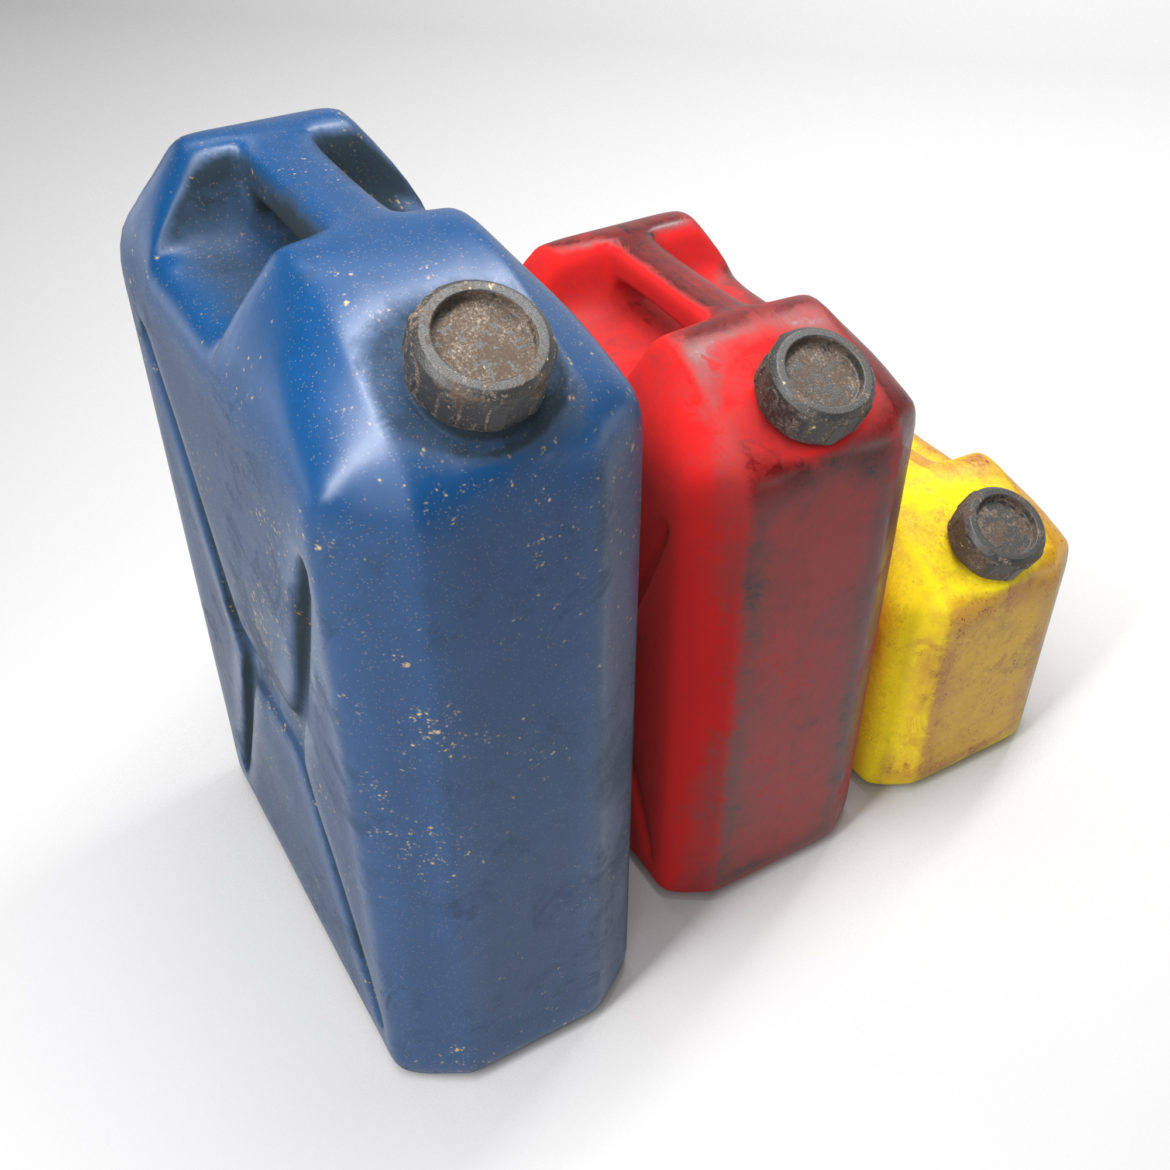  <a class="continue" href="https://www.flatpyramid.com/3d-models/industrial-3d-models/tools/20-10-5-liter-plastic-jerry-cans/">Continue Reading<span> 20-10-5 Liter Plastic Jerry cans</span></a>